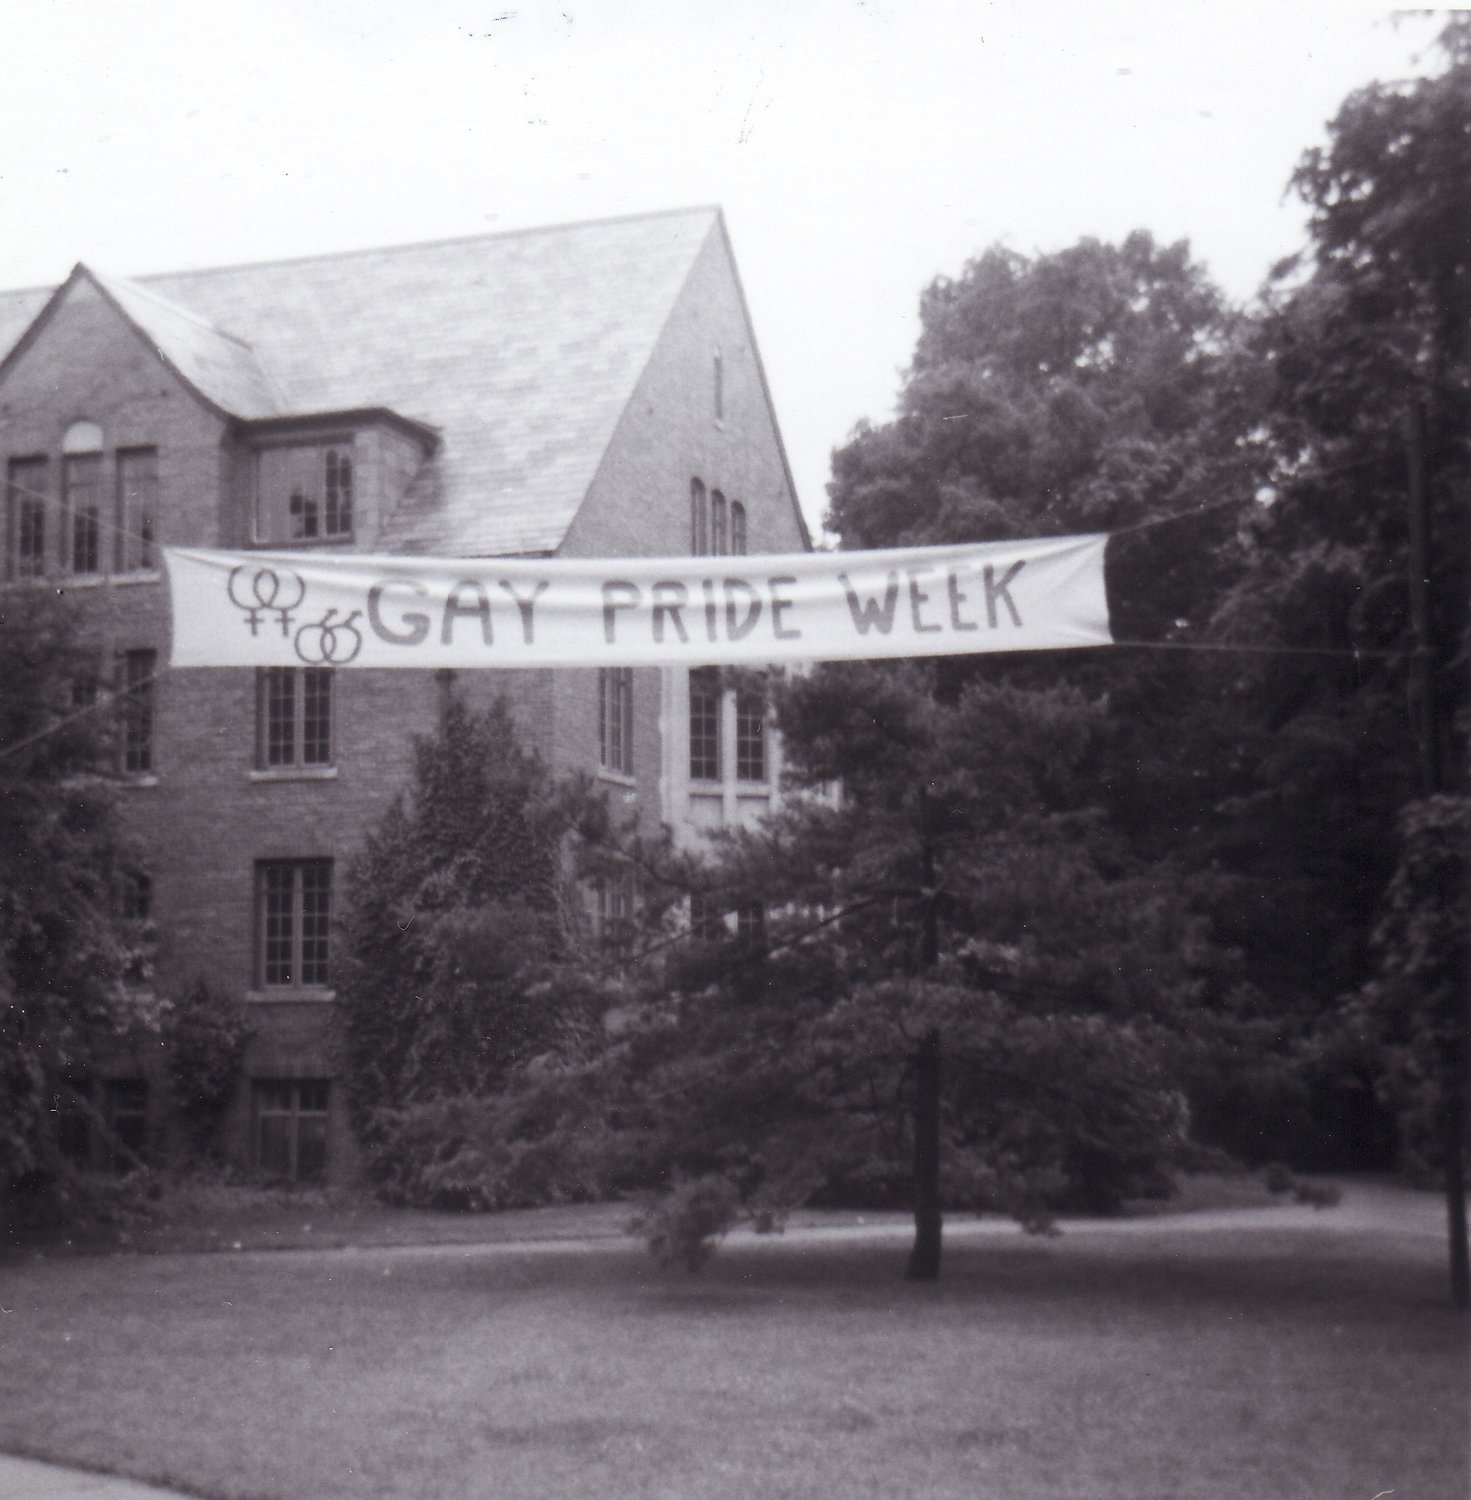 Gay Pride Week banner at the MSU Abbot Road entrance in 1973, a year after school officials denied permission to display the banner. From private collection of Greg Kamm.